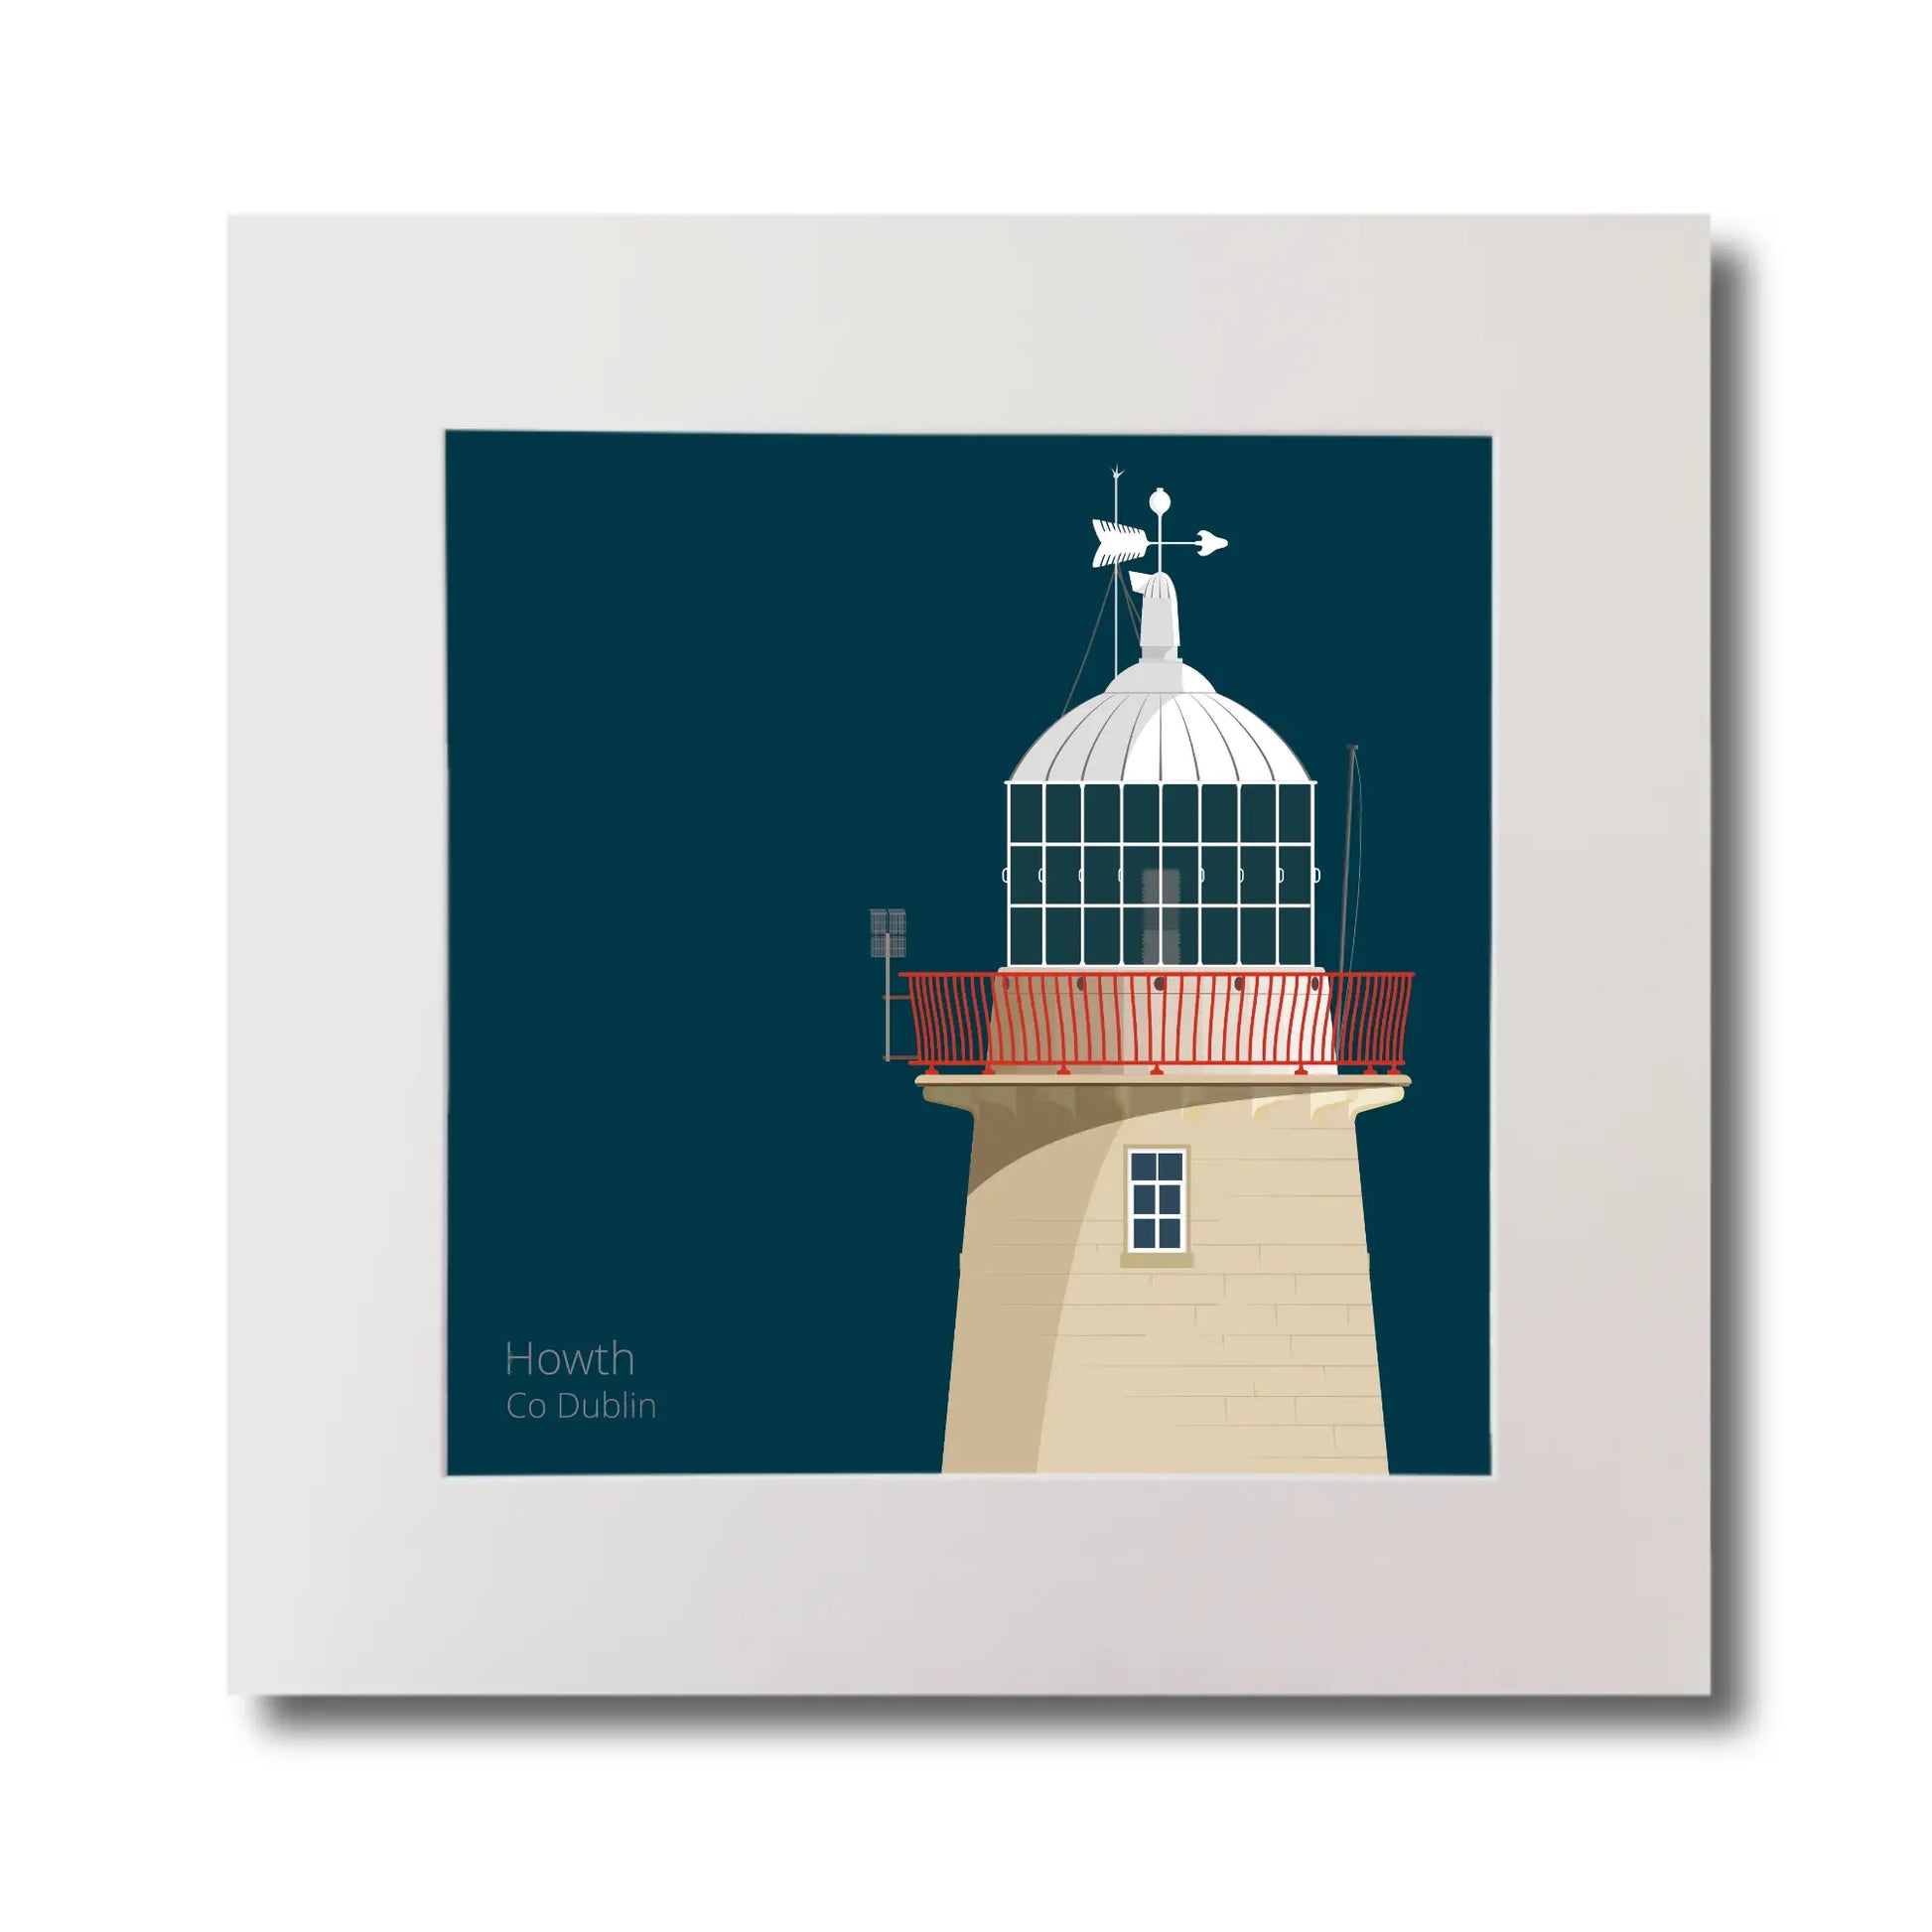 Illustration of Howth lighthouse on a midnight blue background, mounted and measuring 30x30cm.